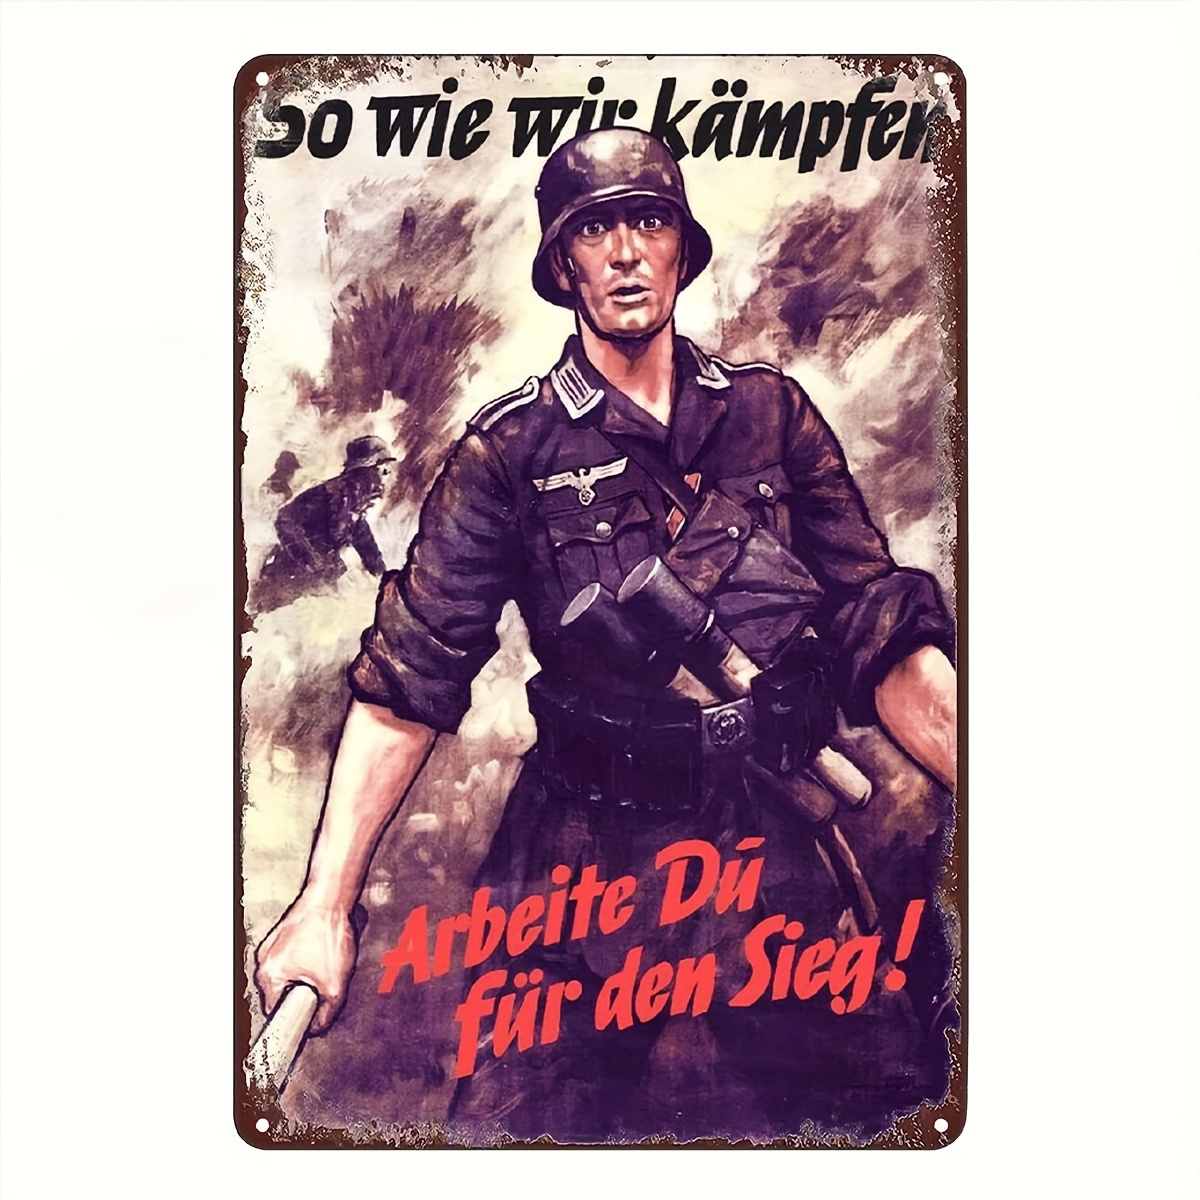 

Vintage Ww2 German Soldier Metal Sign - 8x12 Inch Tin Wall Art Decor Plaque For Home, Bar, Pub, Cafe, Living Room, Bedroom - Artistic Drawing Set For Artists